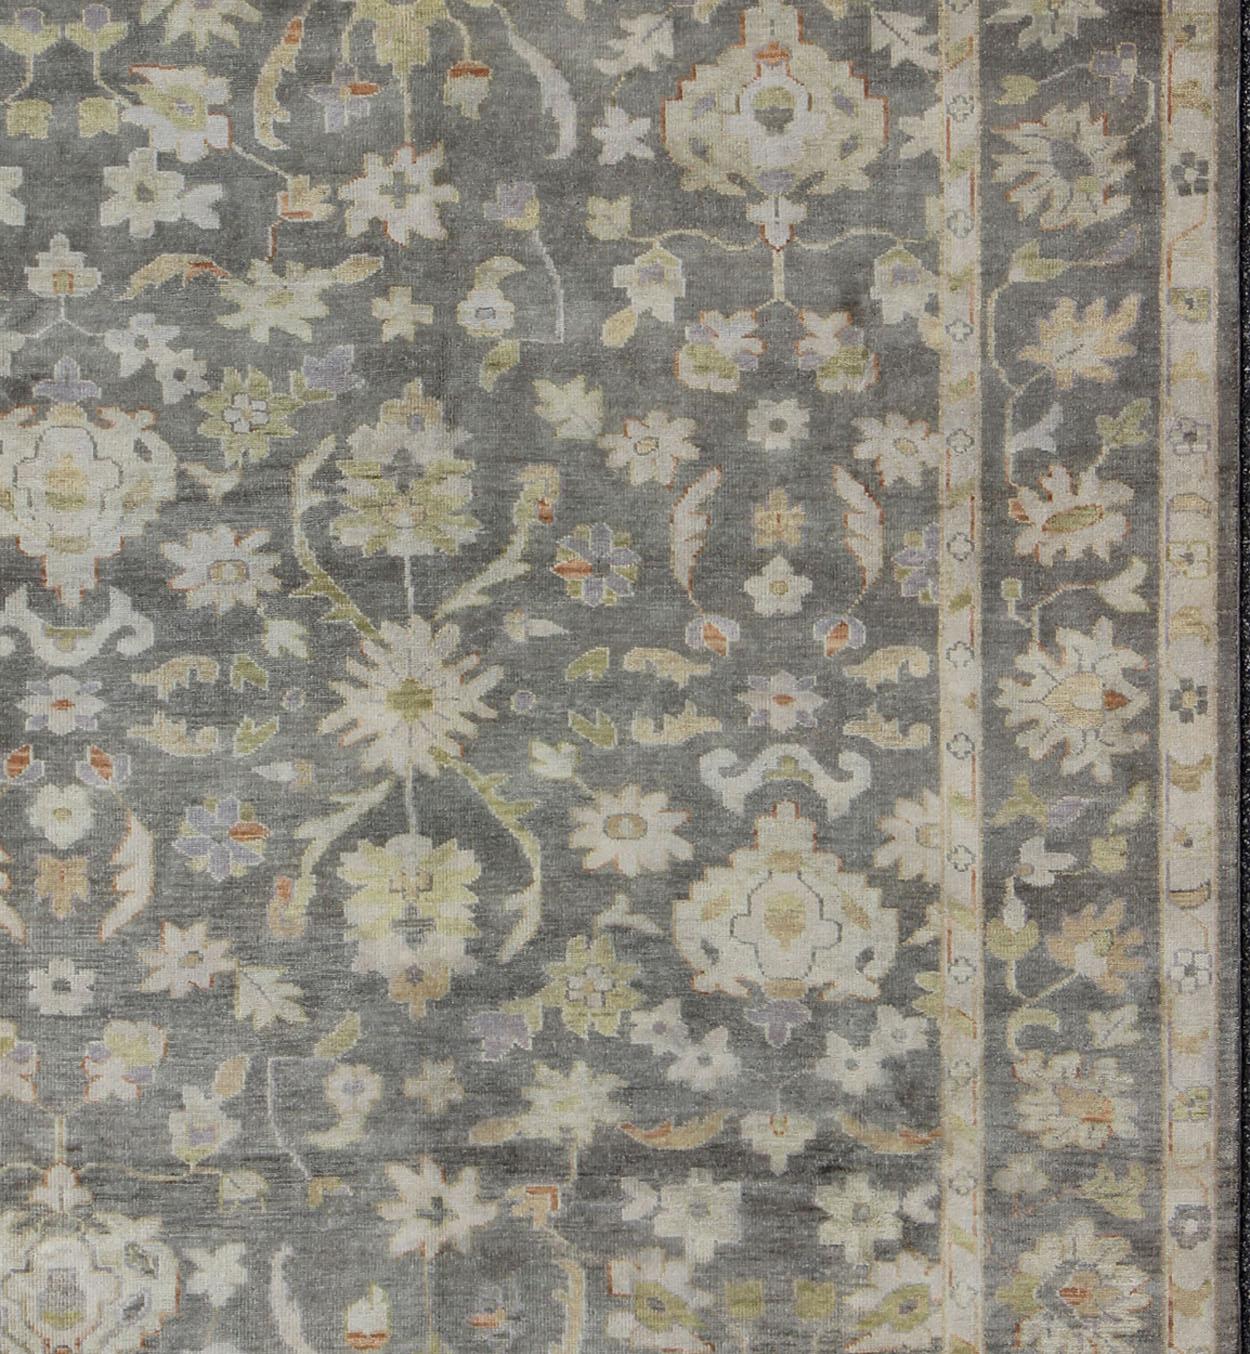 Gray Oushak Rug in floral design, Keivan Woven Arts rug/OB-393788, country of origin / type: India / Oushak, circa Early-21st Century. New Oushak

Measures: 9'0 x 12'0.

This hand-knotted Indian made Oushak rug features a floral design in grey,